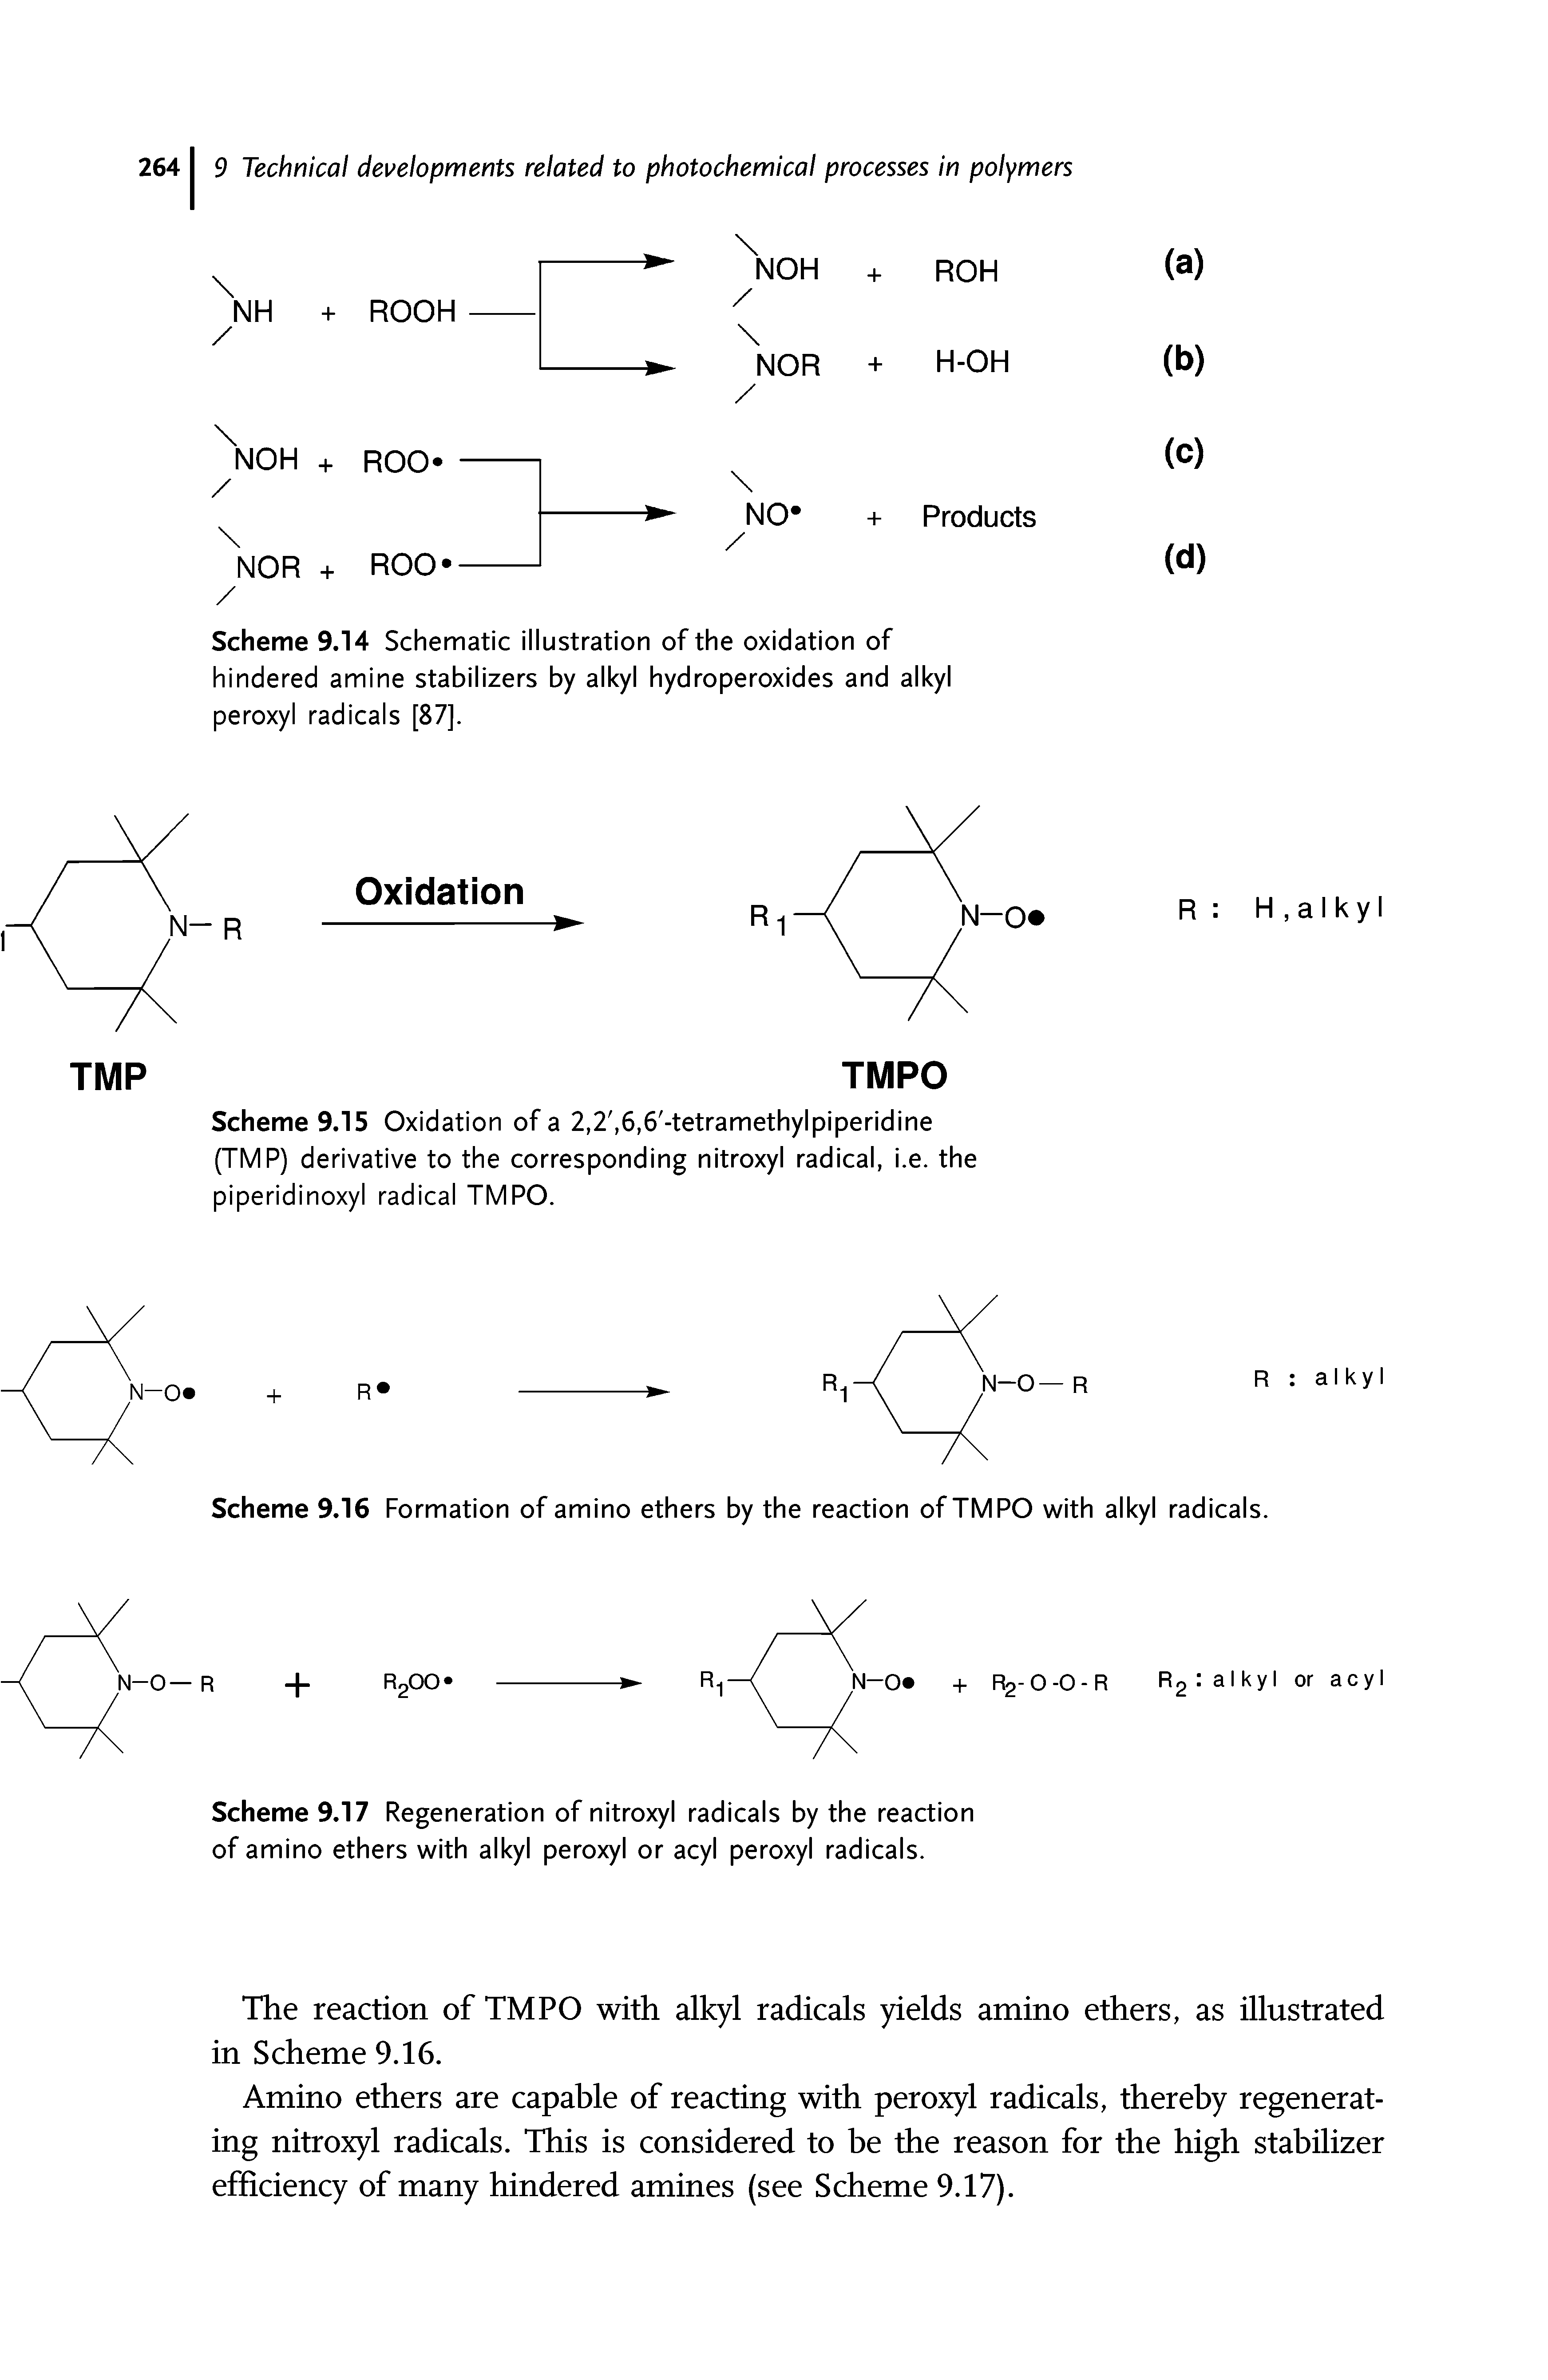 Scheme 9.14 Schematic illustration of the oxidation of hindered amine stabilizers by alkyl hydroperoxides and alkyl peroxyl radicals [87].